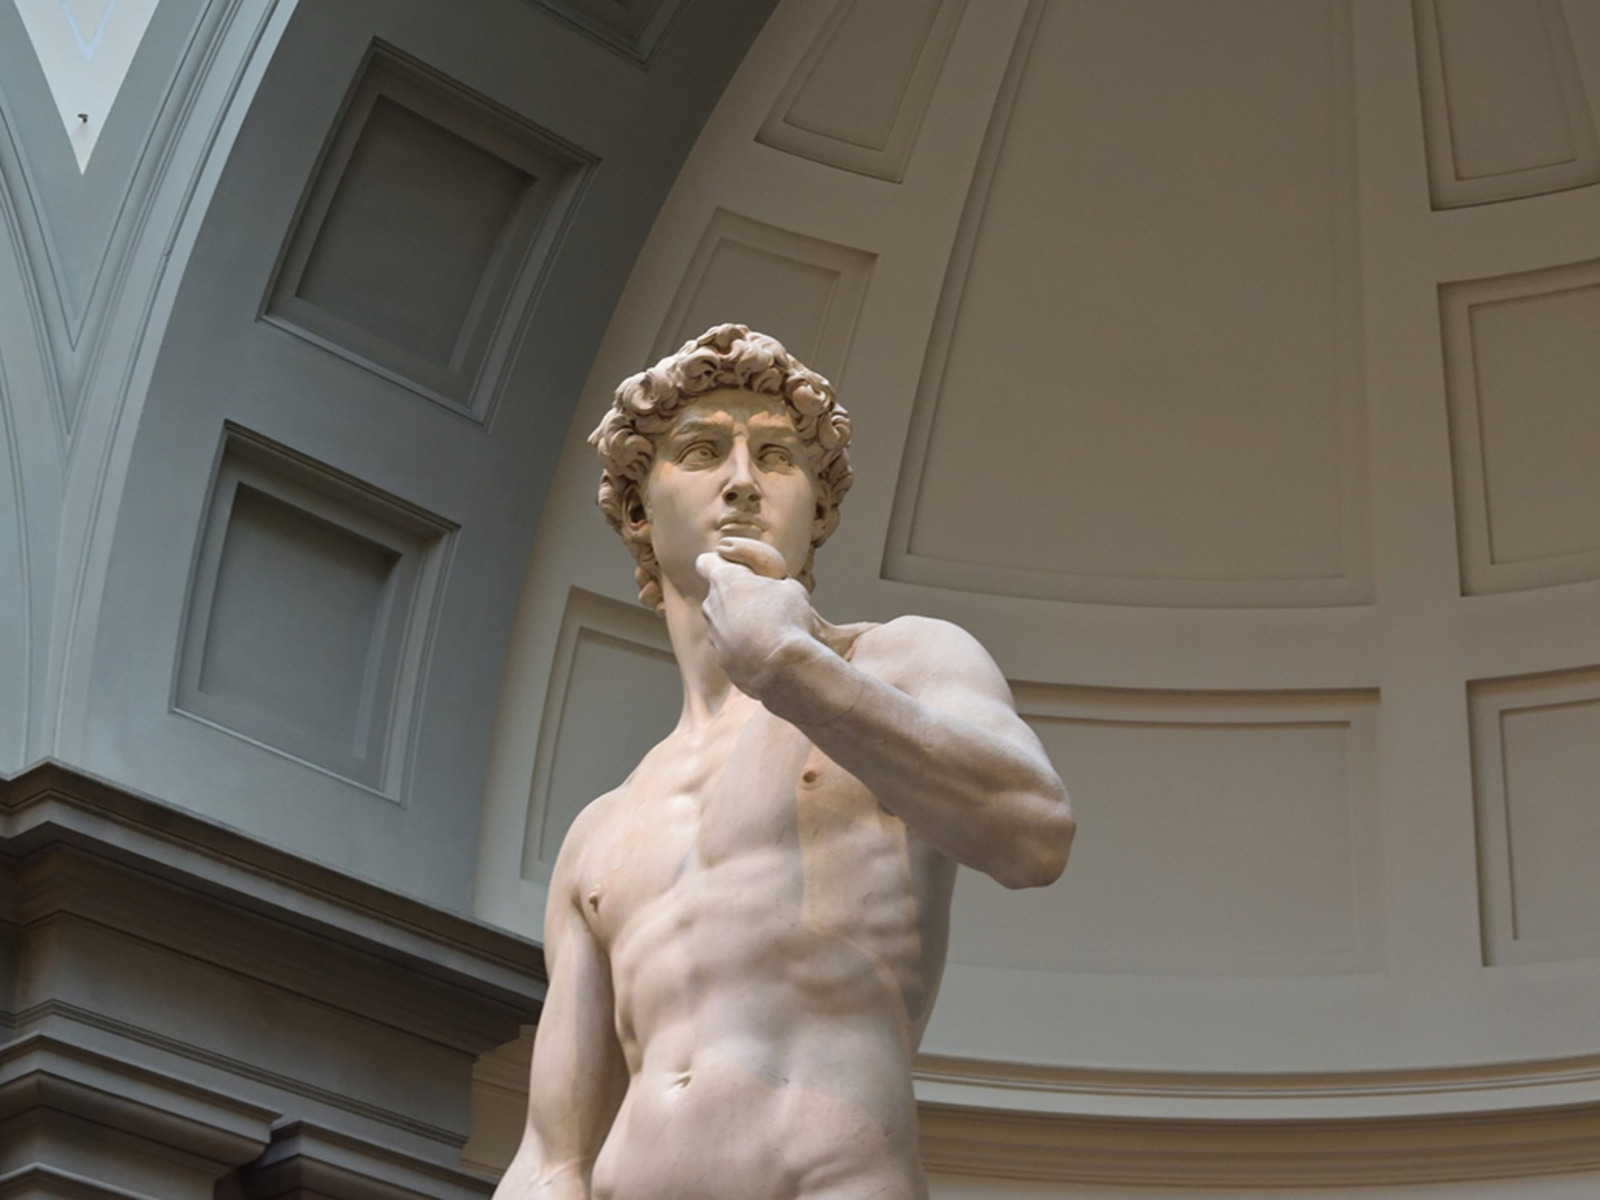 Which Humanist Ideals Are Most Expressed In The Sculpture David By Michelangelo?